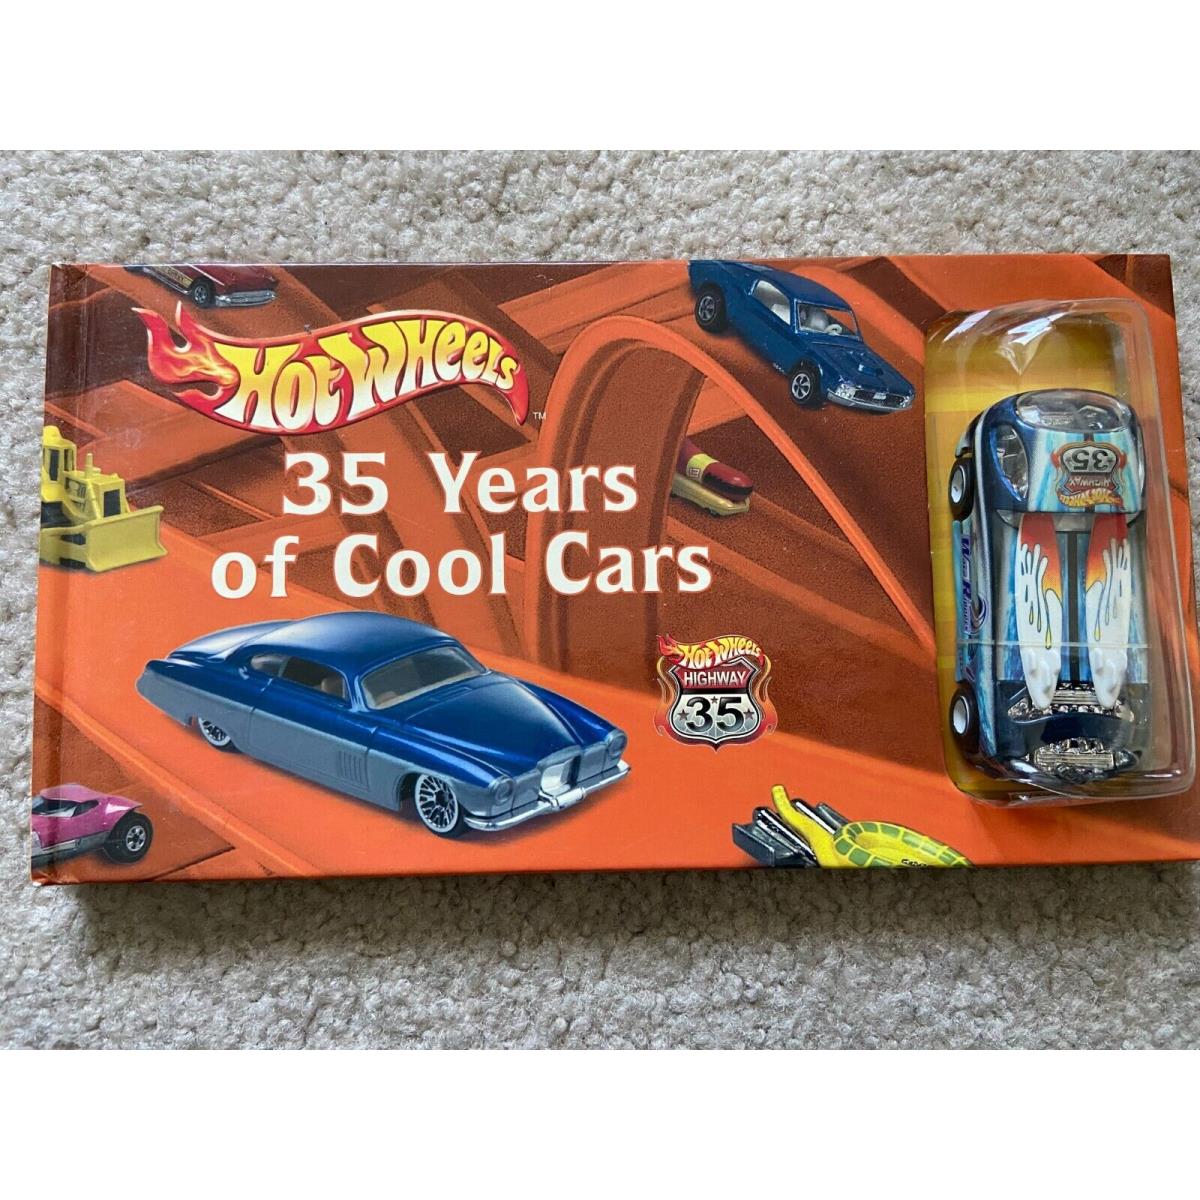 35 Years of Cool Cars Hot Wheels Book and Car - Plastic Blister